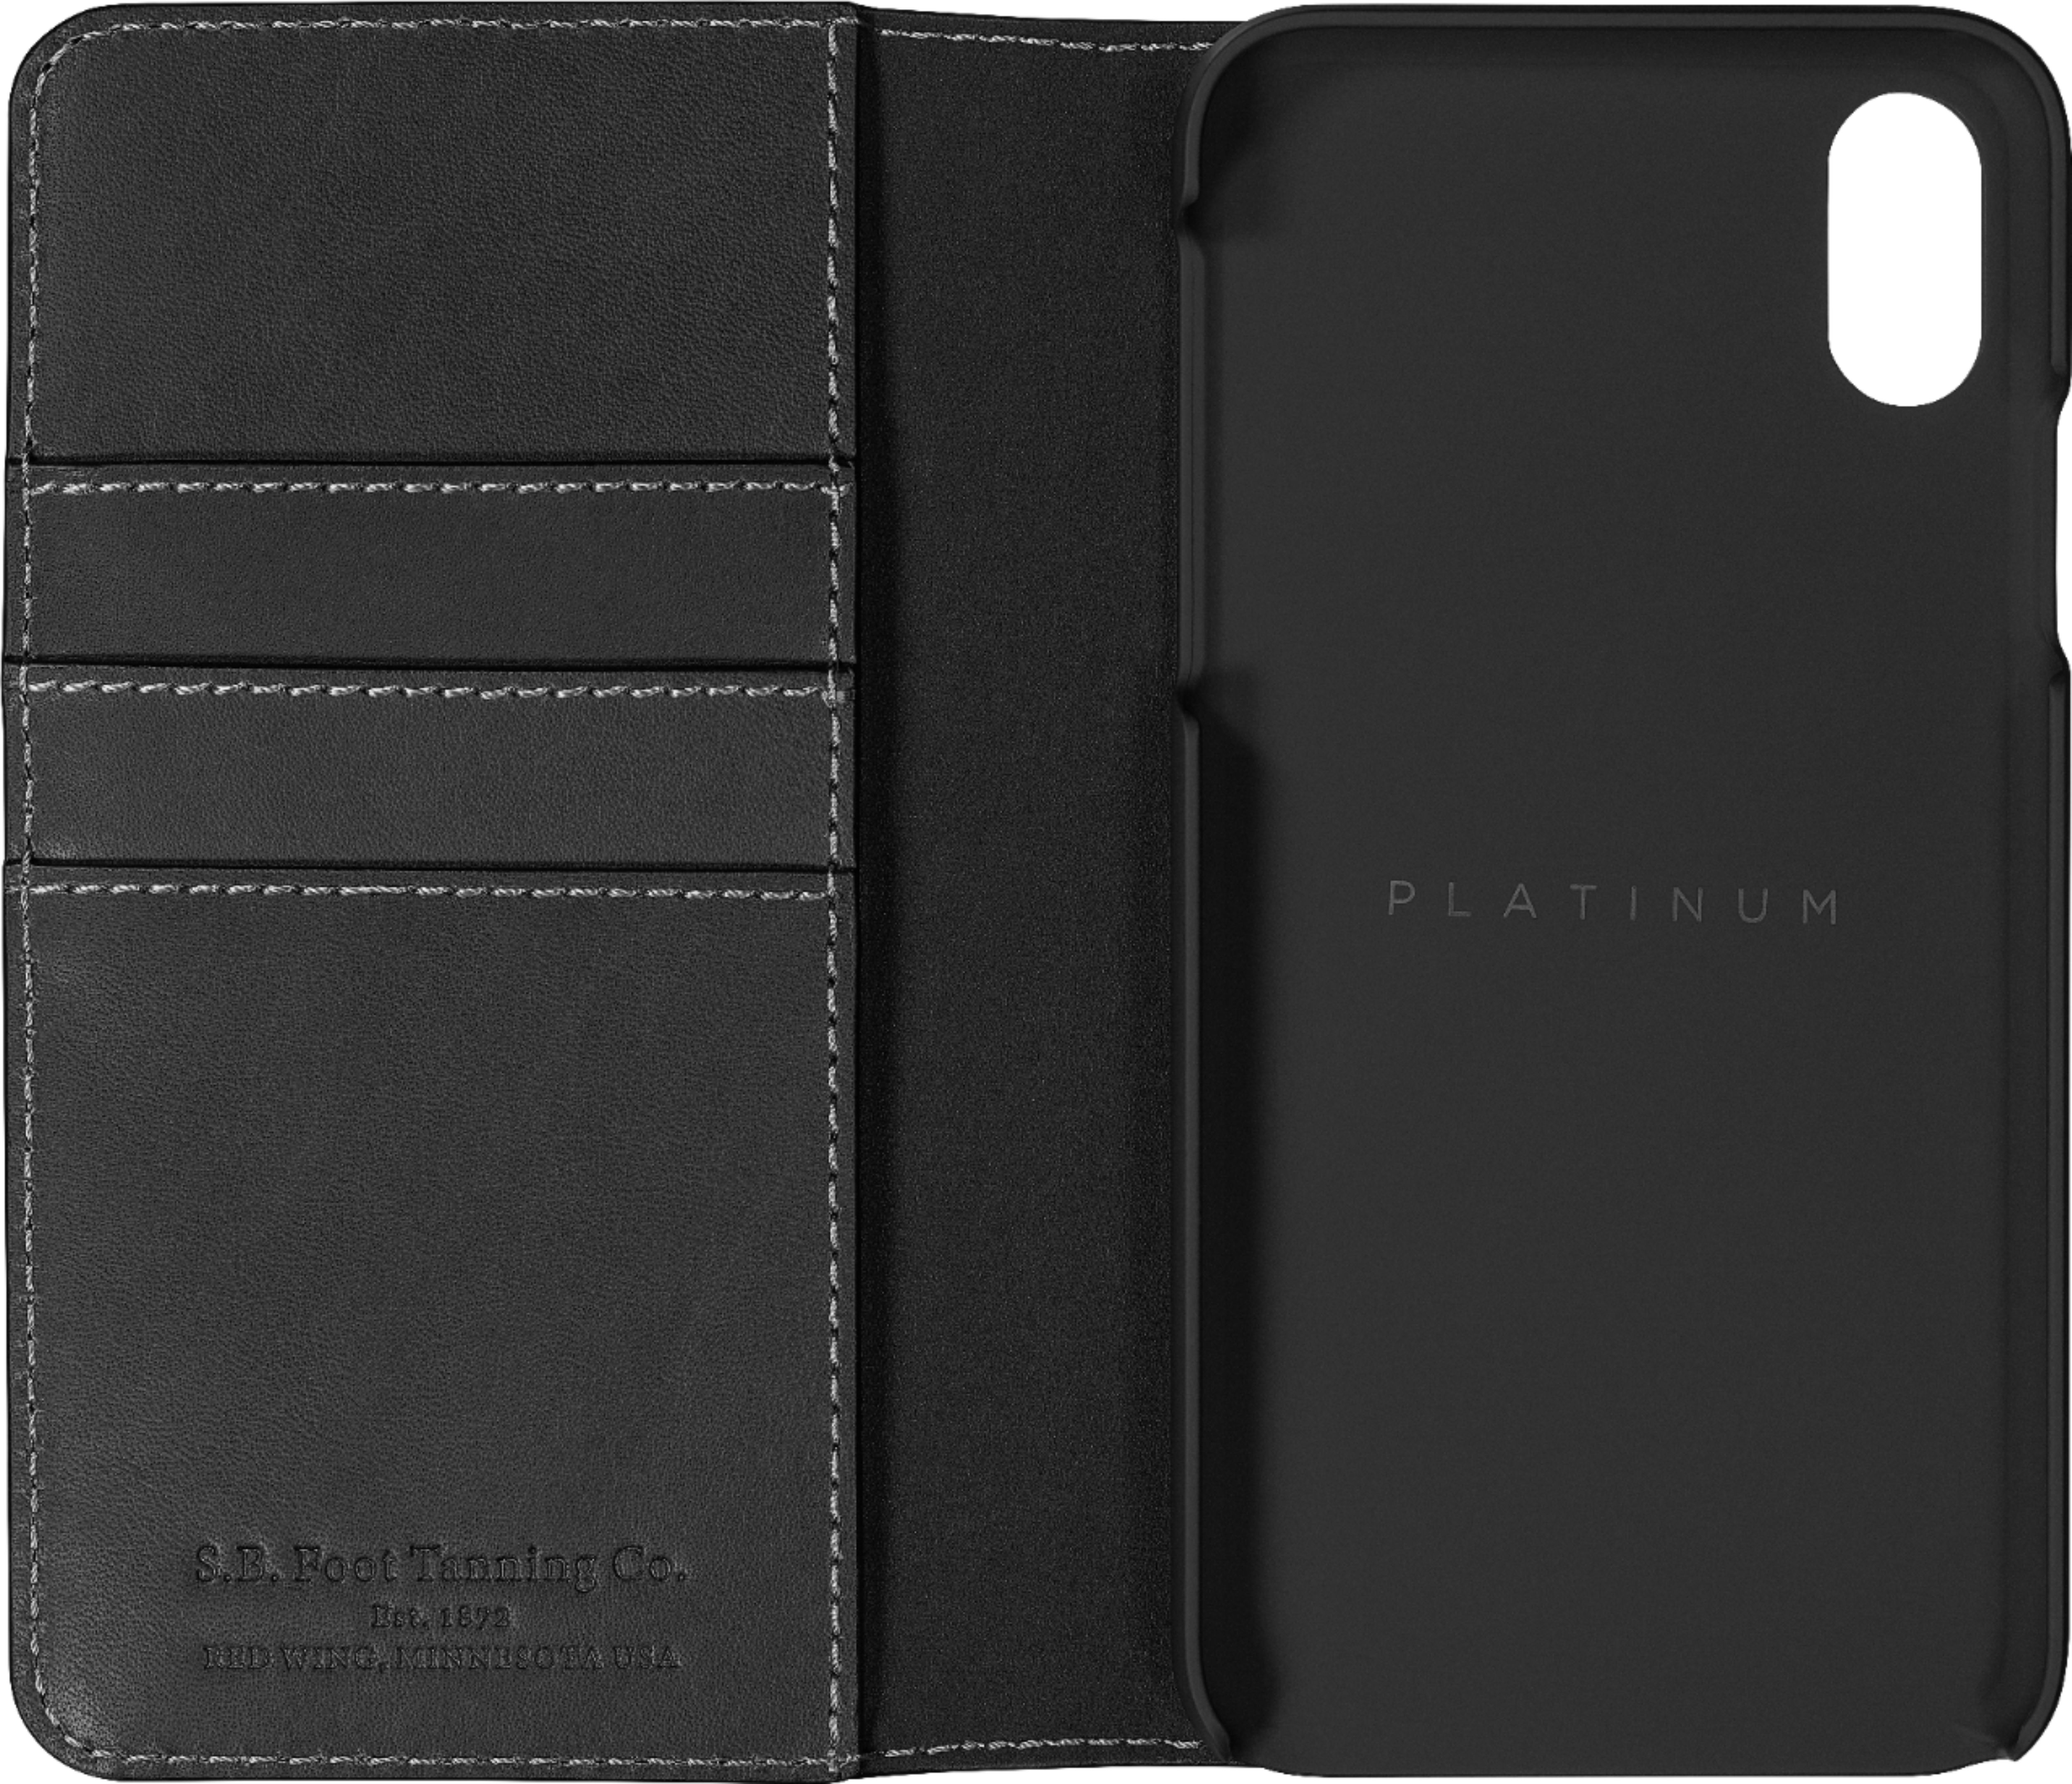 Apple iPhone 8 Official Leather Case Review - PhoneArena